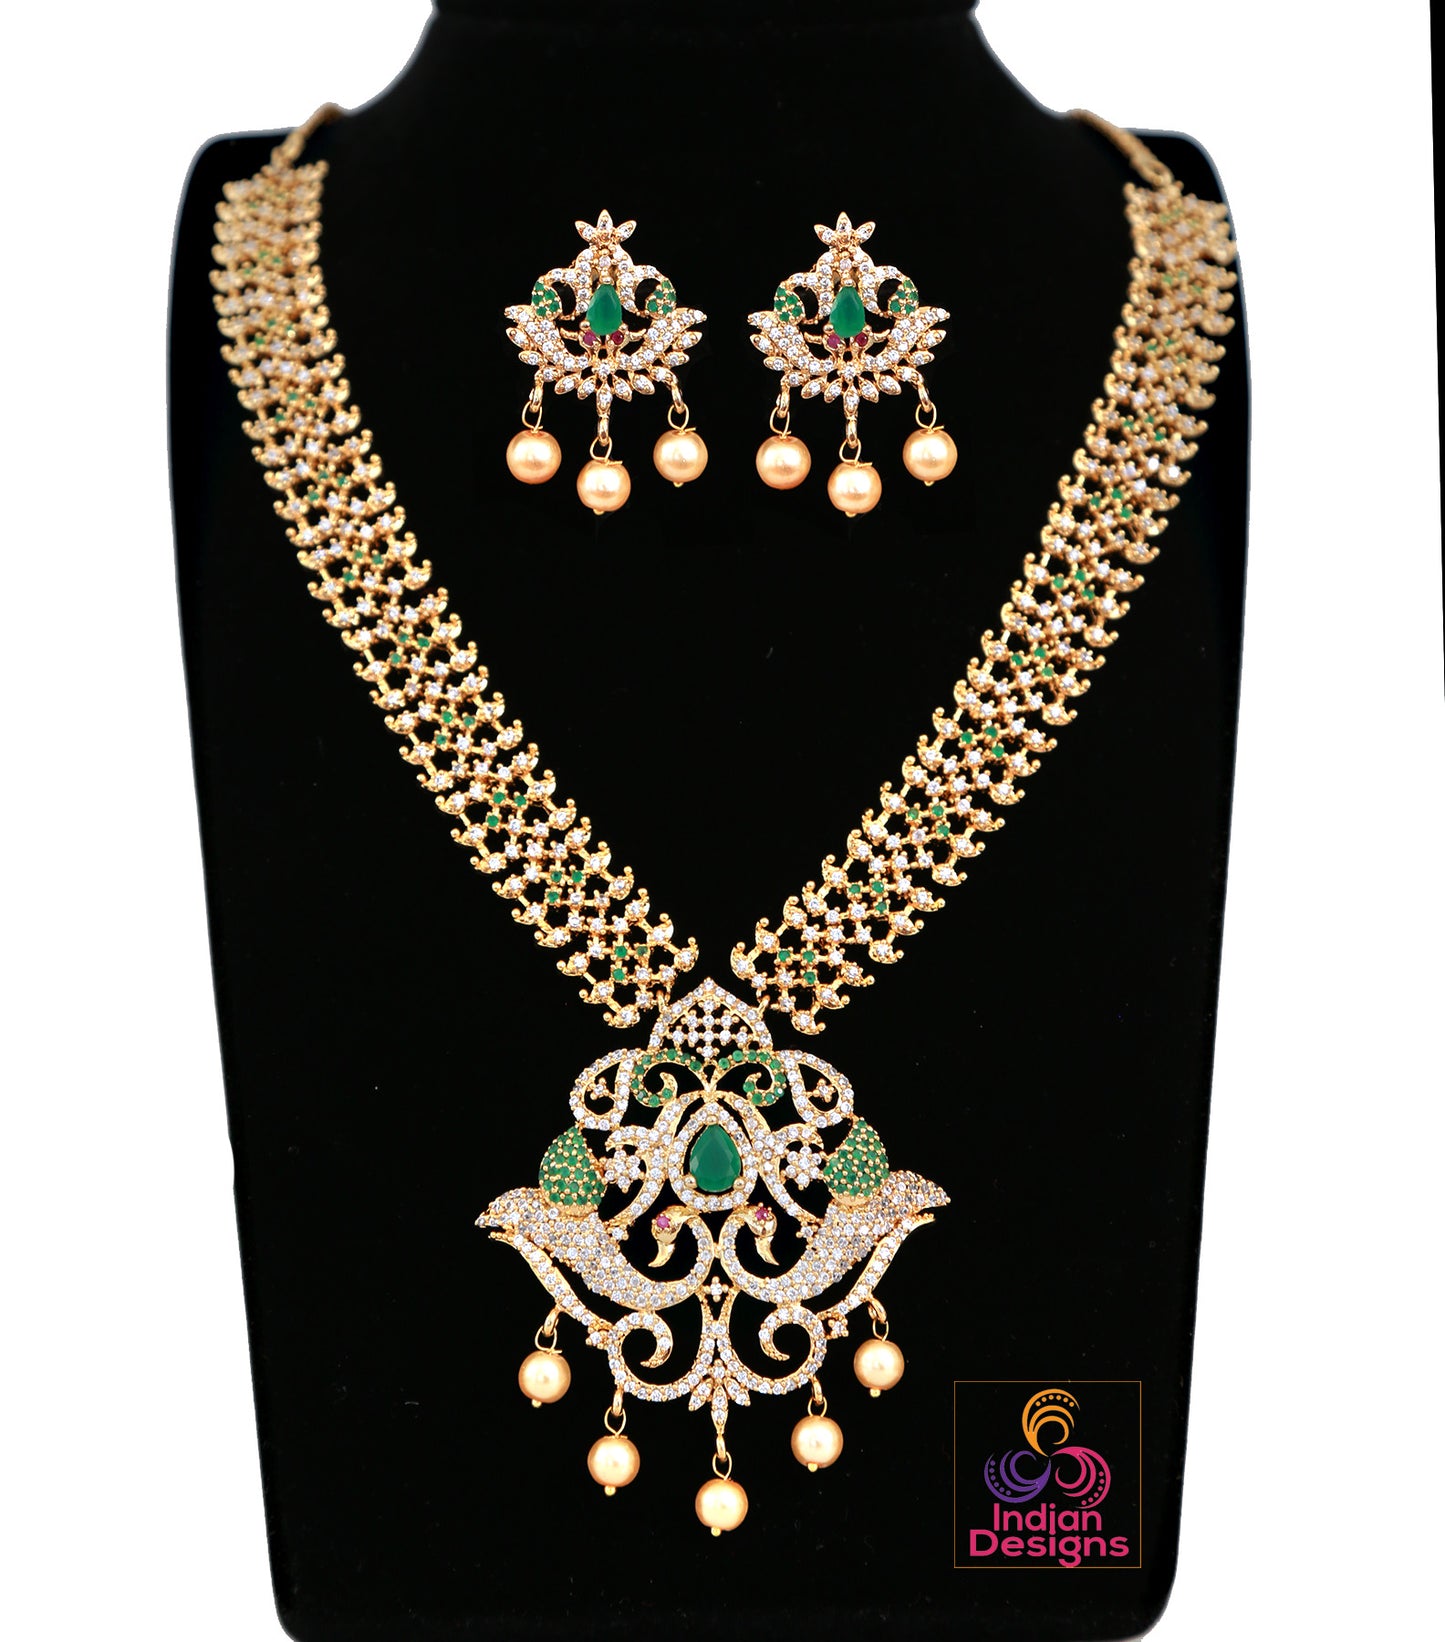 Gold Plated American Diamond Peacock Designer Necklace | CZ Ruby Emerald Crystal Jewelry